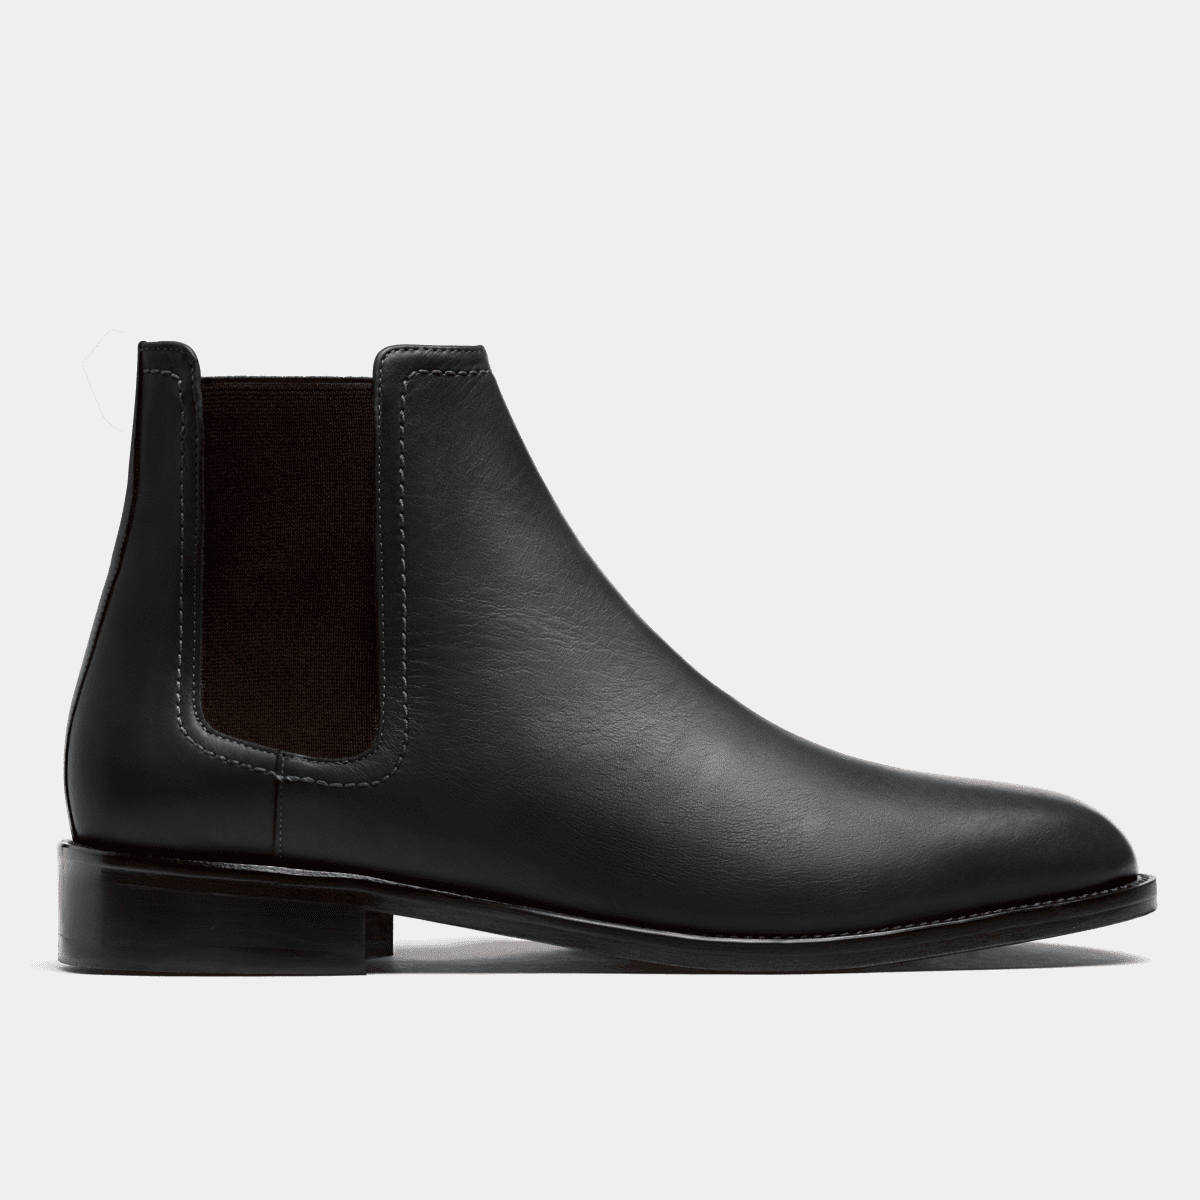 Men's Dress Boots  Upgrade your Style - Hockerty